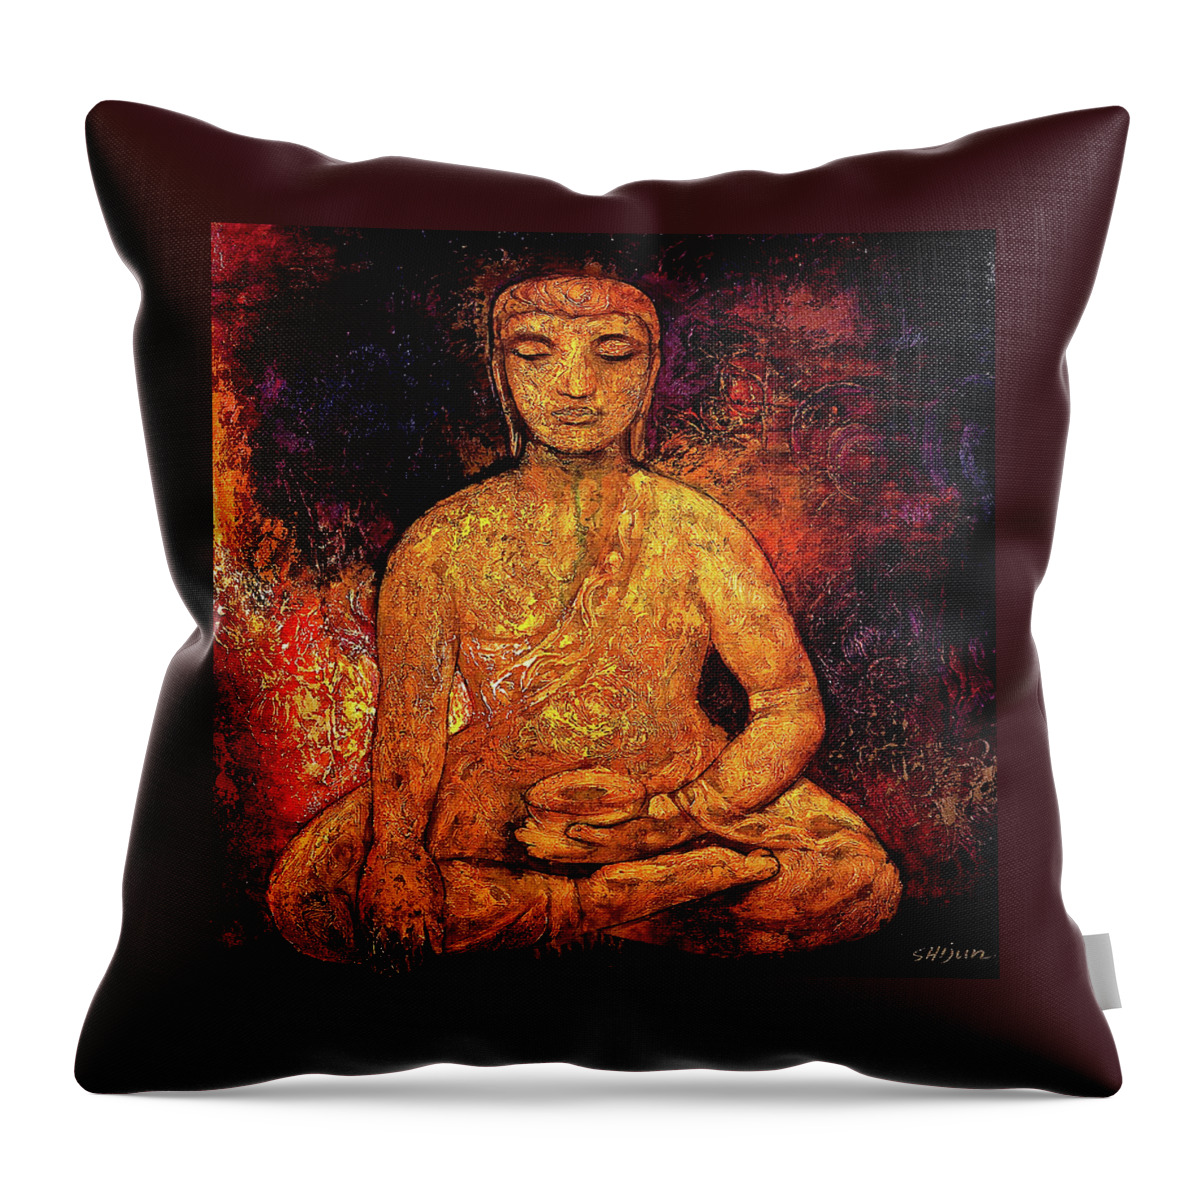 Oil Painting Throw Pillow featuring the painting Golden Buddha by Shijun Munns